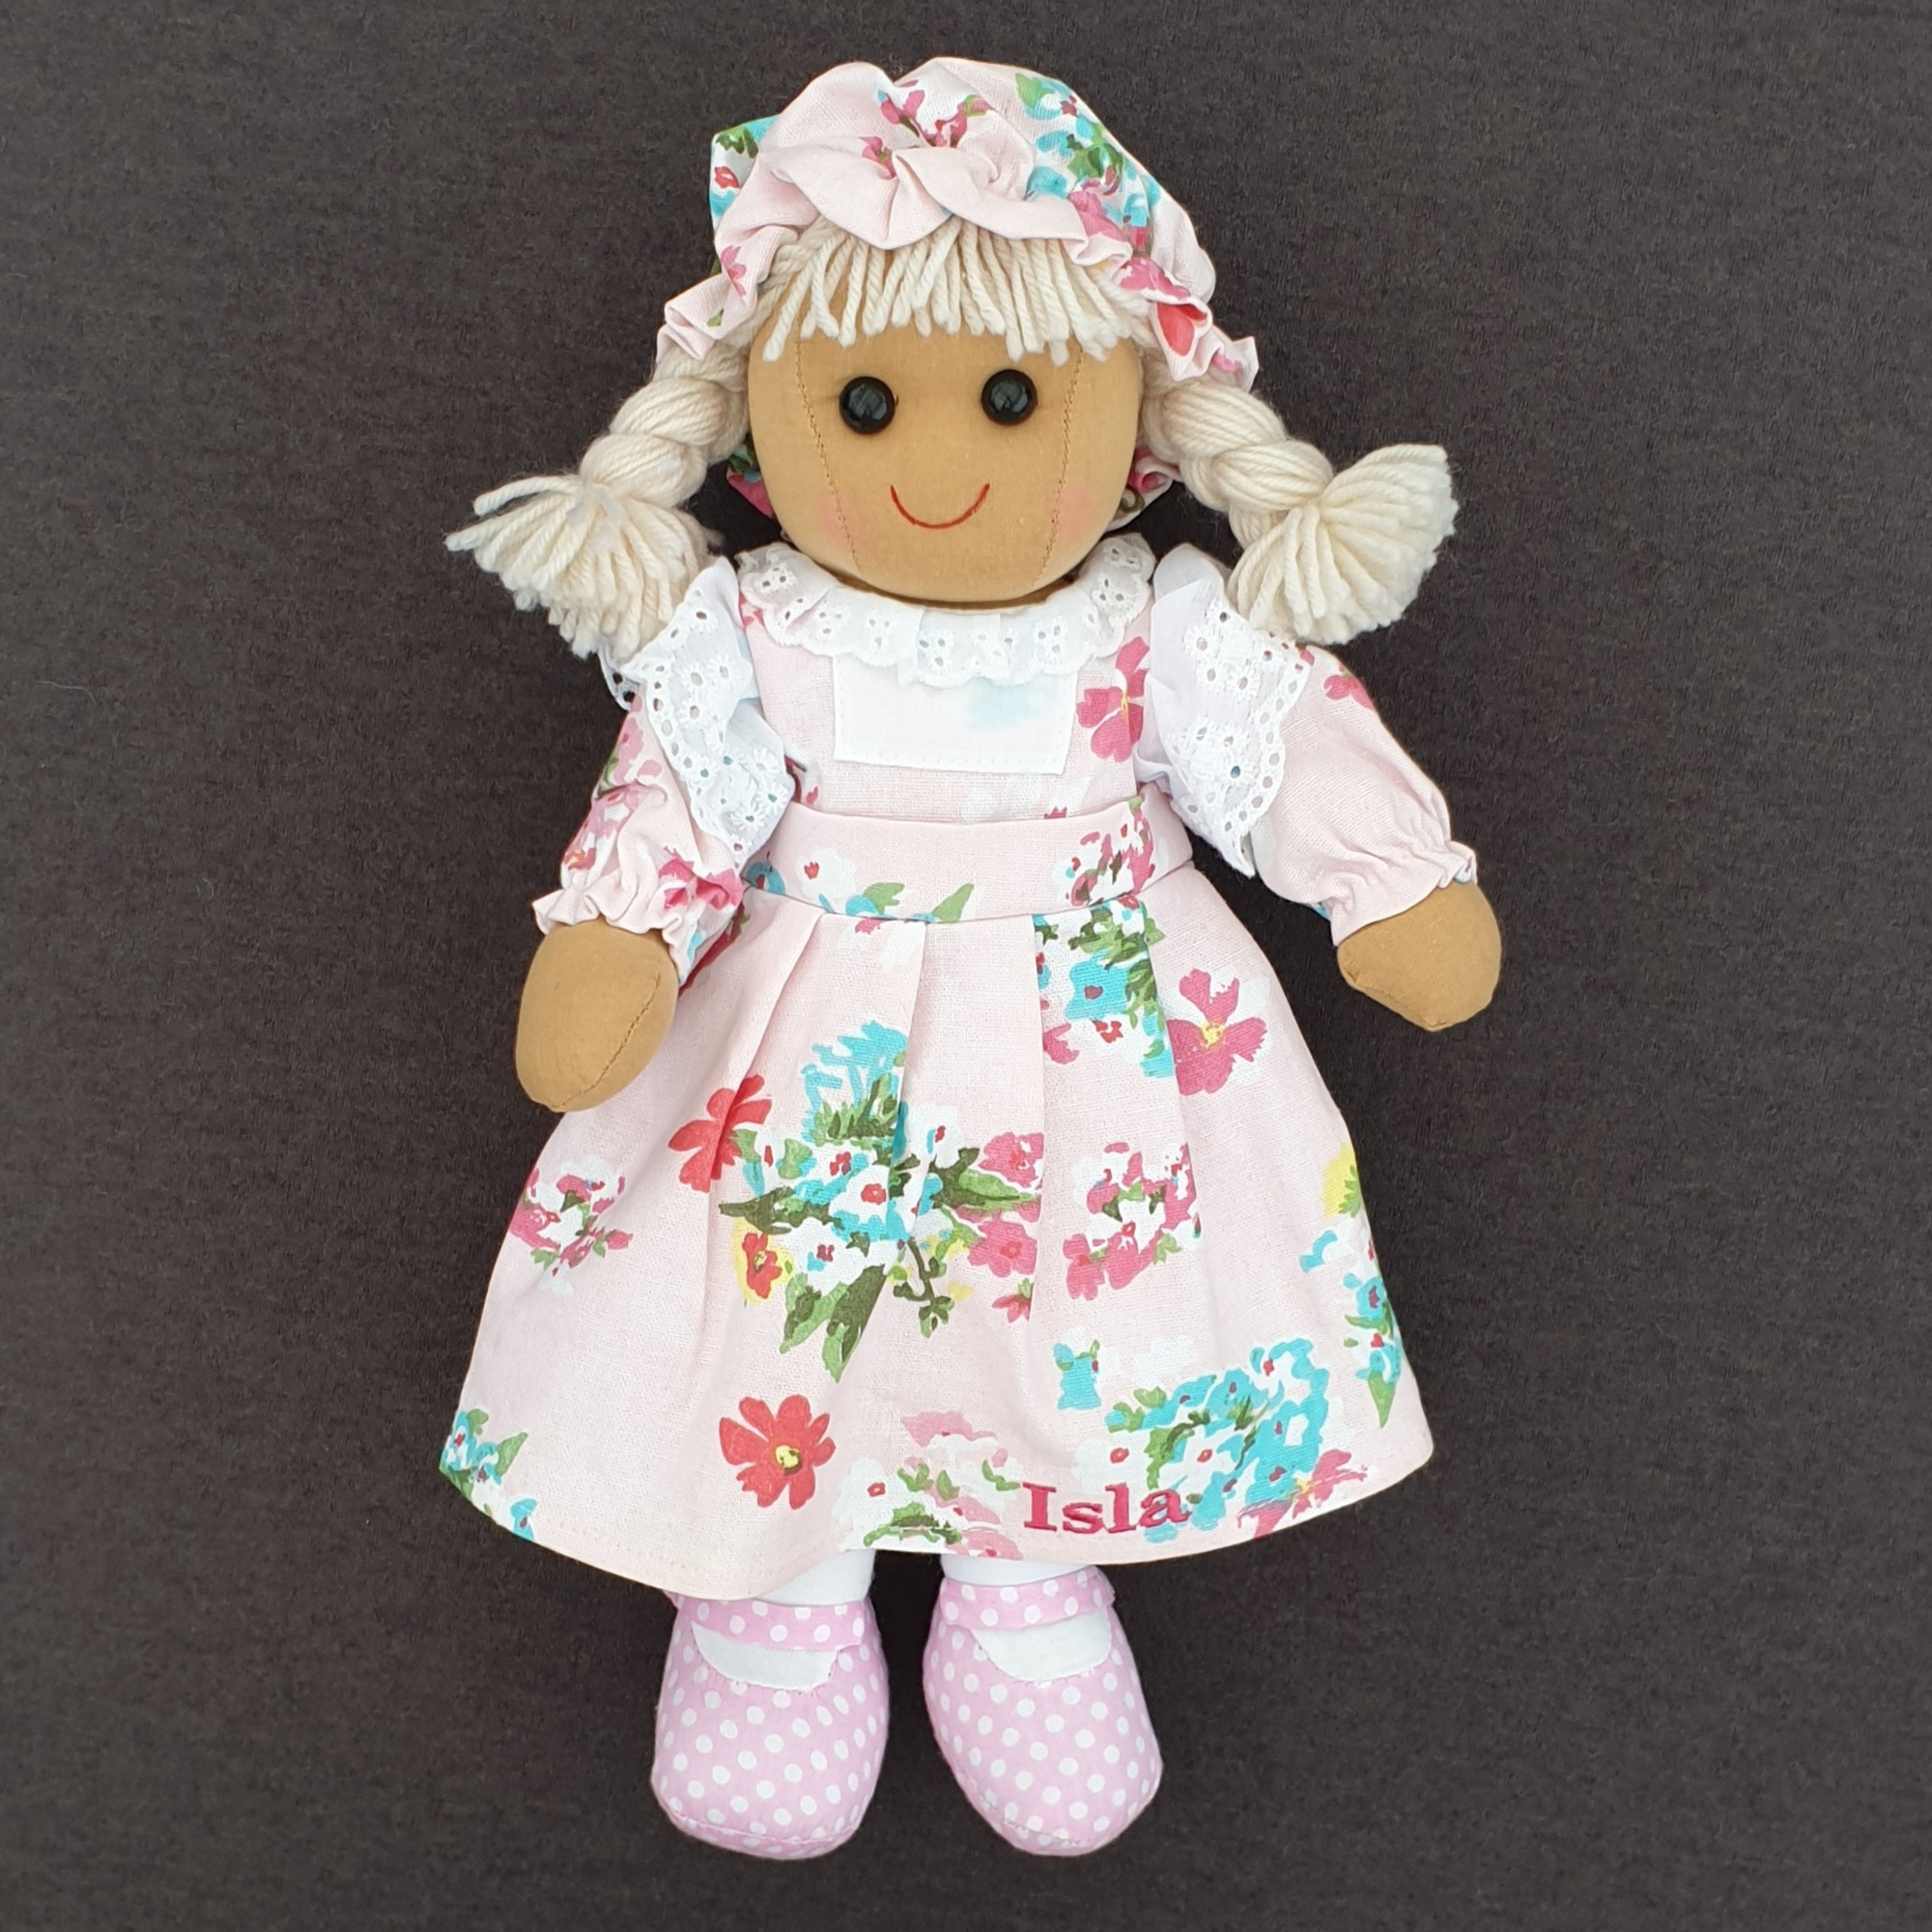 Personalised rag doll wearing a pink floral dress that can be personalised with a name of up to 10 characters plus a matching hat.  Underneath her dress she is wearing white pantaloons. 